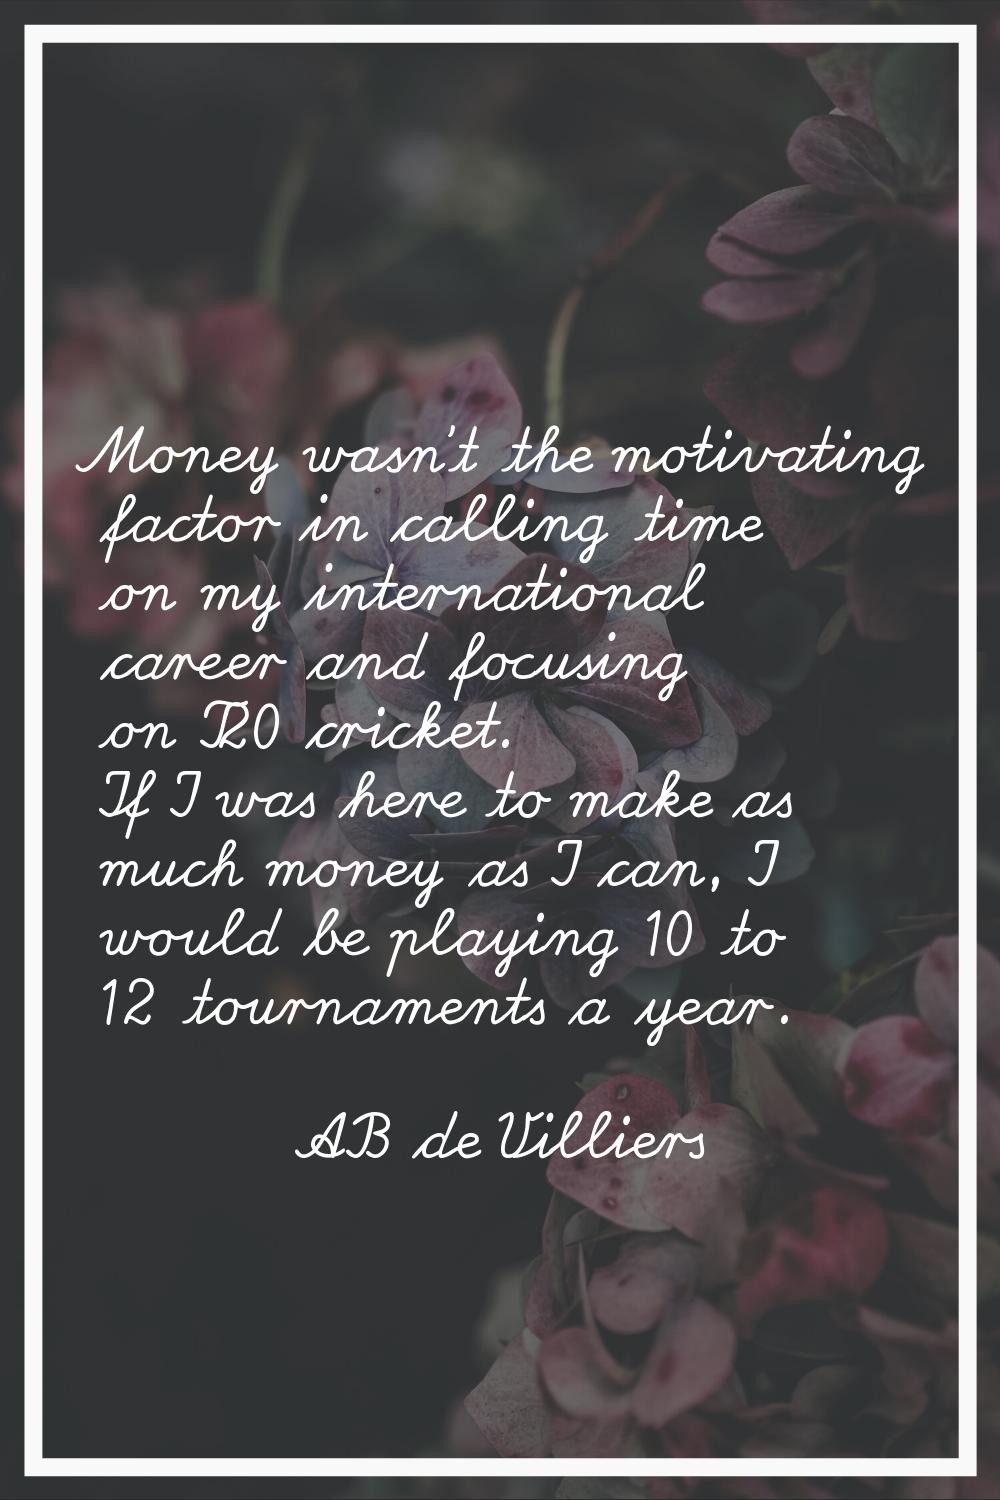 Money wasn't the motivating factor in calling time on my international career and focusing on T20 c